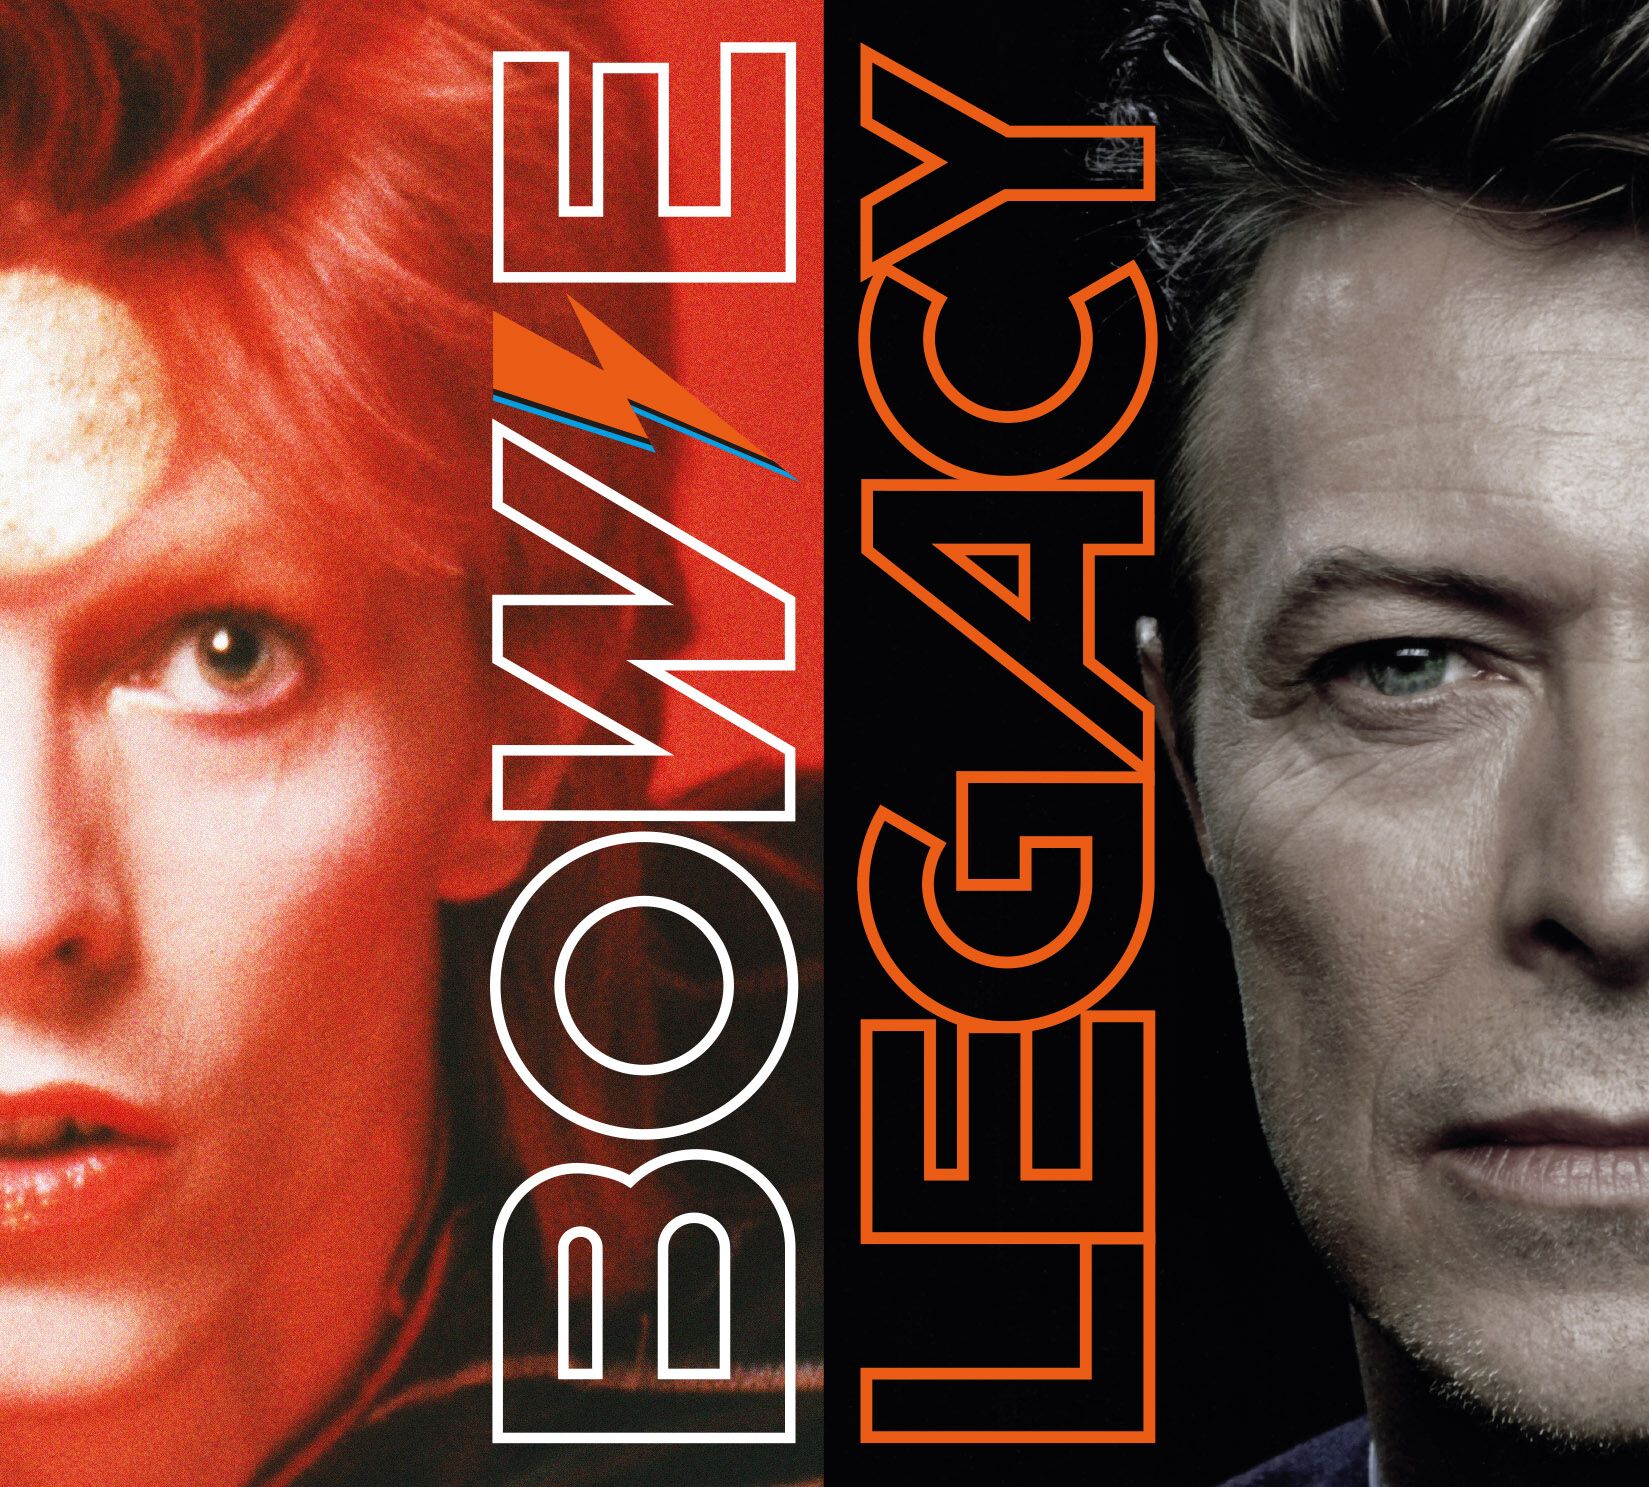 Legacy (The Very Best Of David Bowie) (2CD) | Dig! Store